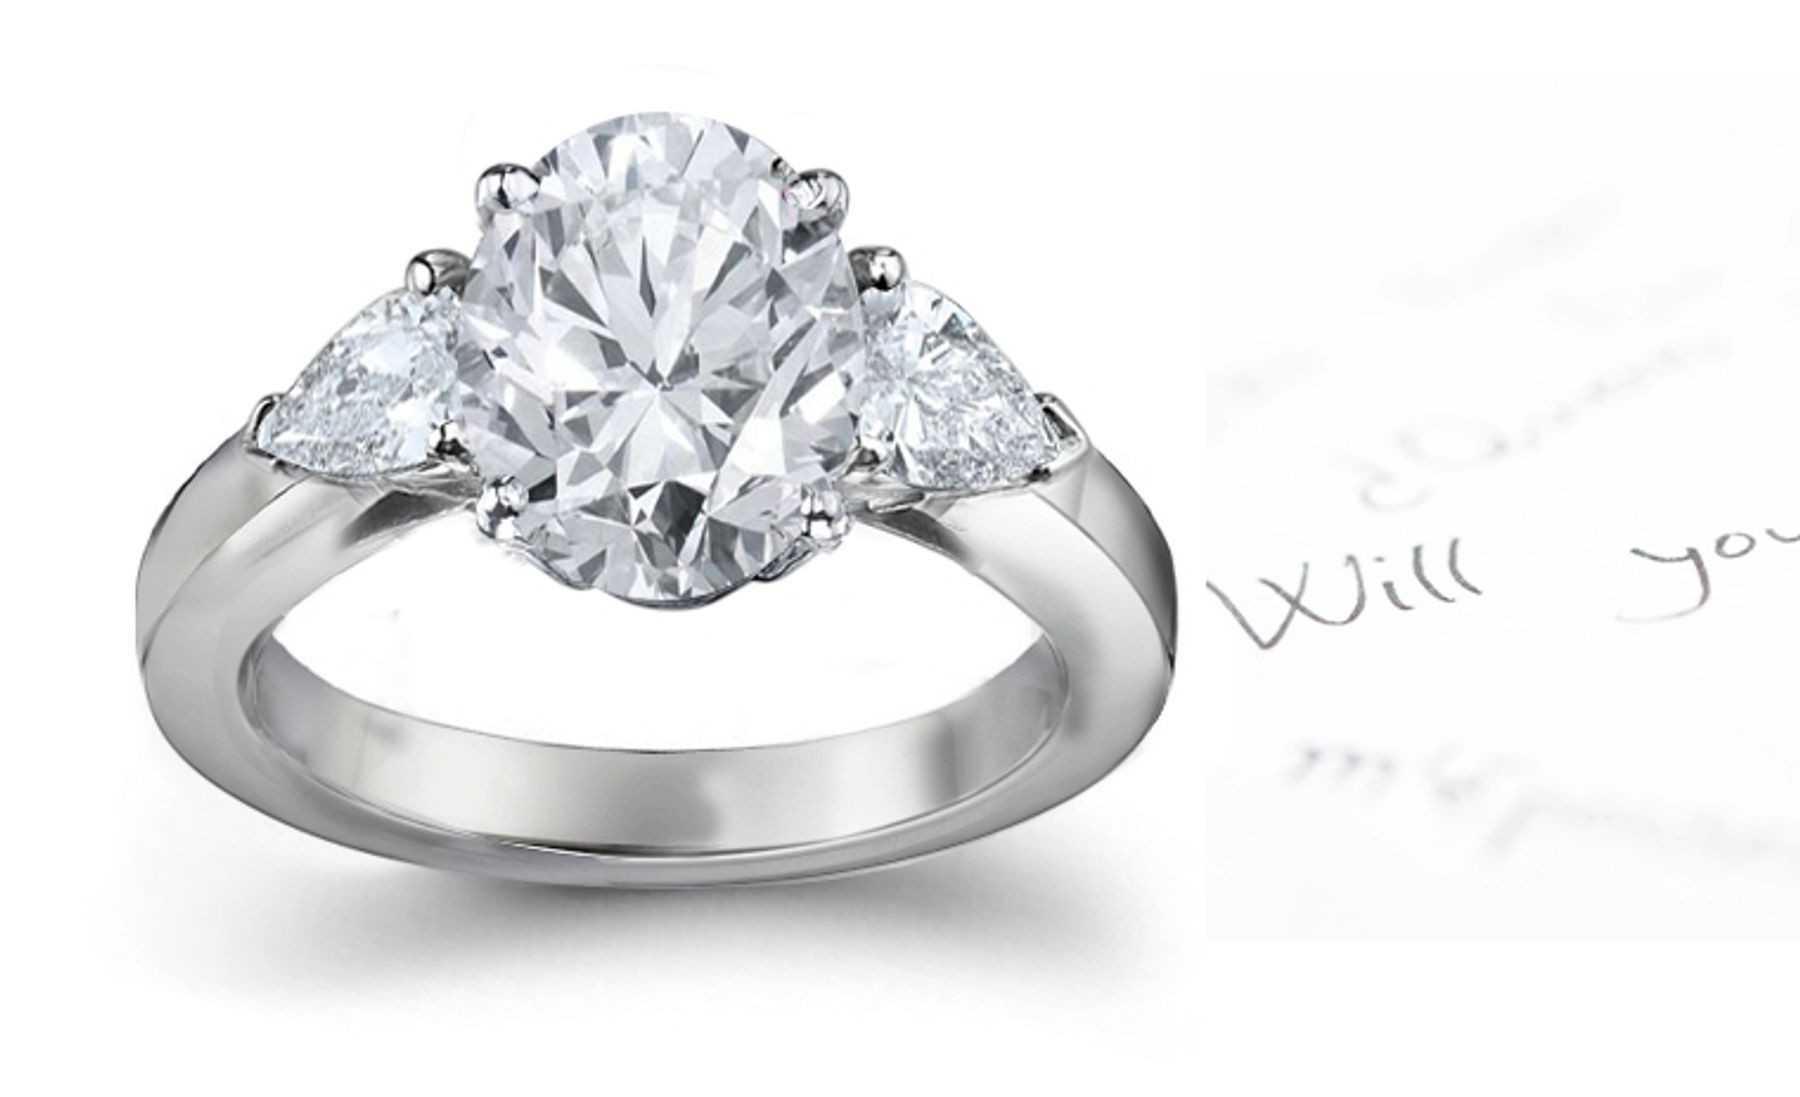 Oval & Pear Shape Diamond Three Stone Engagement Ring in Polished Platinum